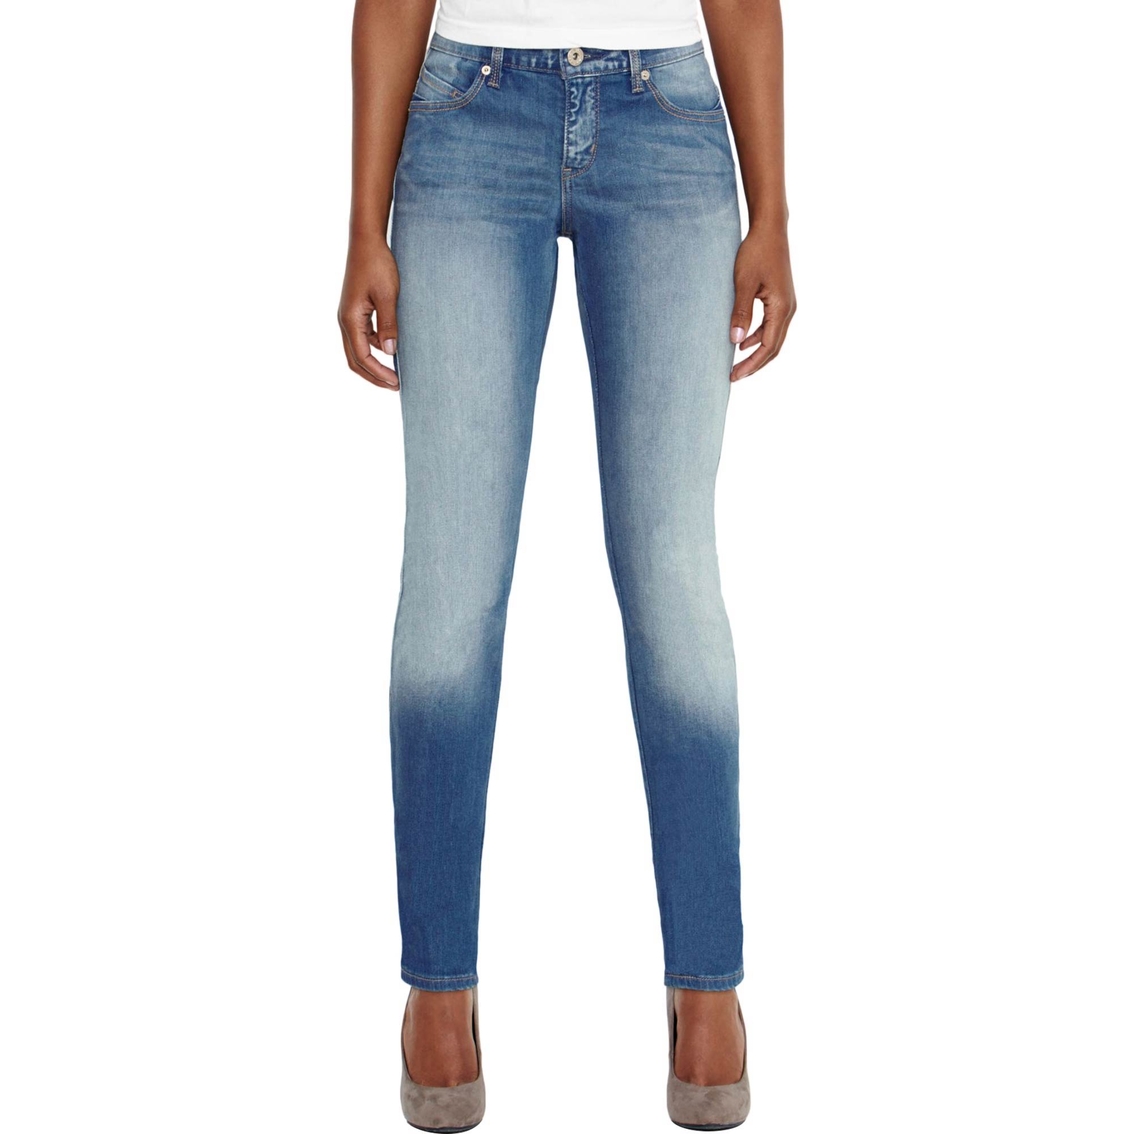 Levi's Mid Rise Skinny Flatters 'n Flaunts Jeans | Jeans | Clothing ...